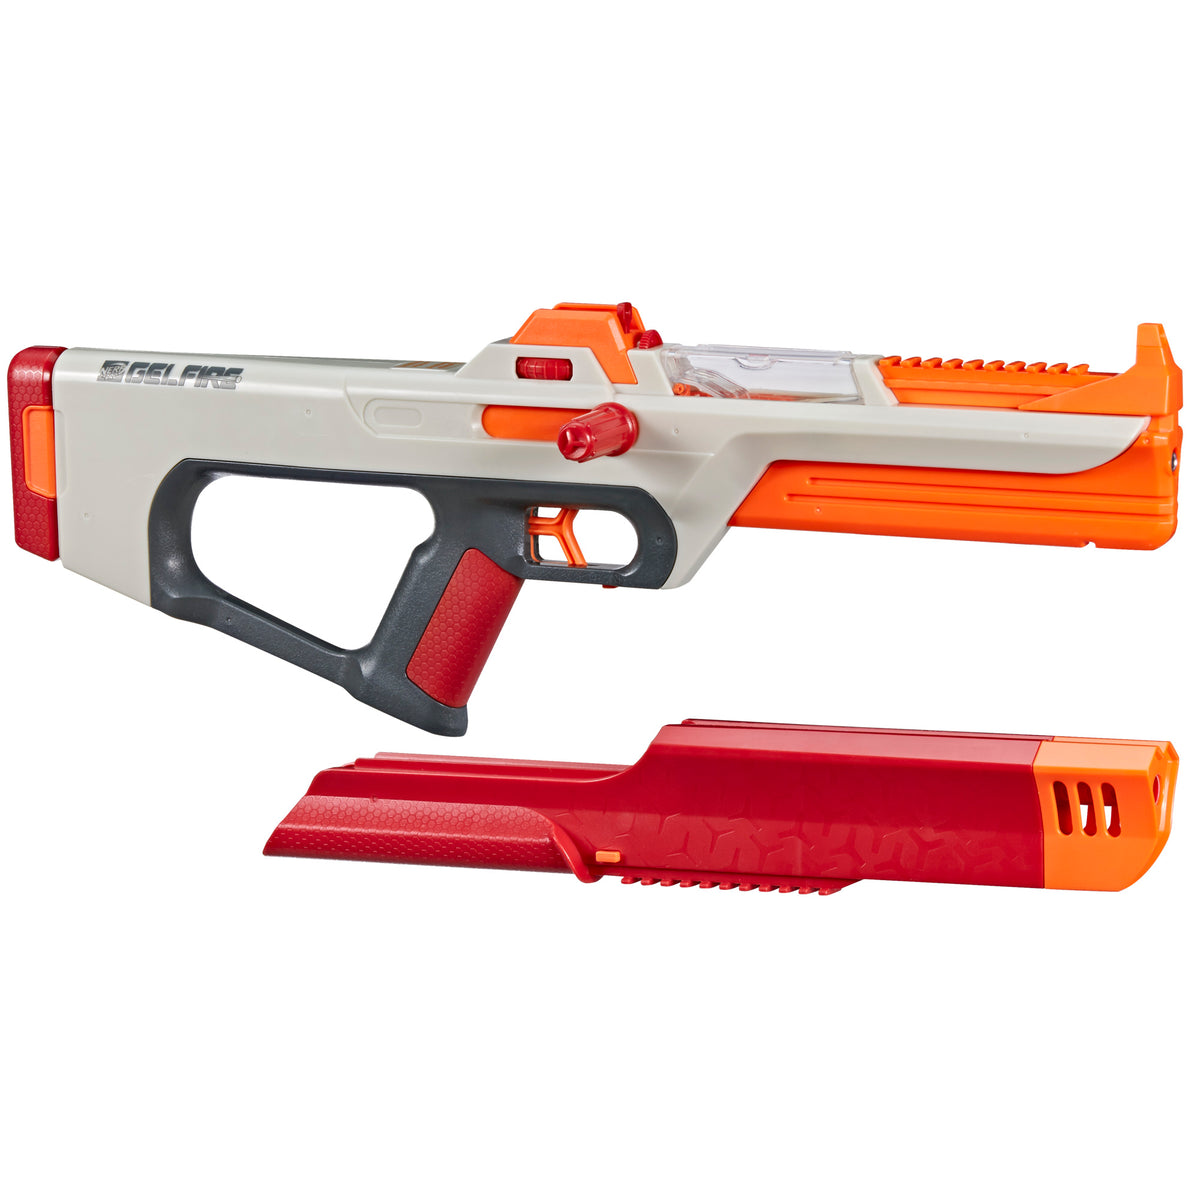 Nerf's New High-Powered Gel Blaster Debuts Ammo That Bursts on Impact - CNET